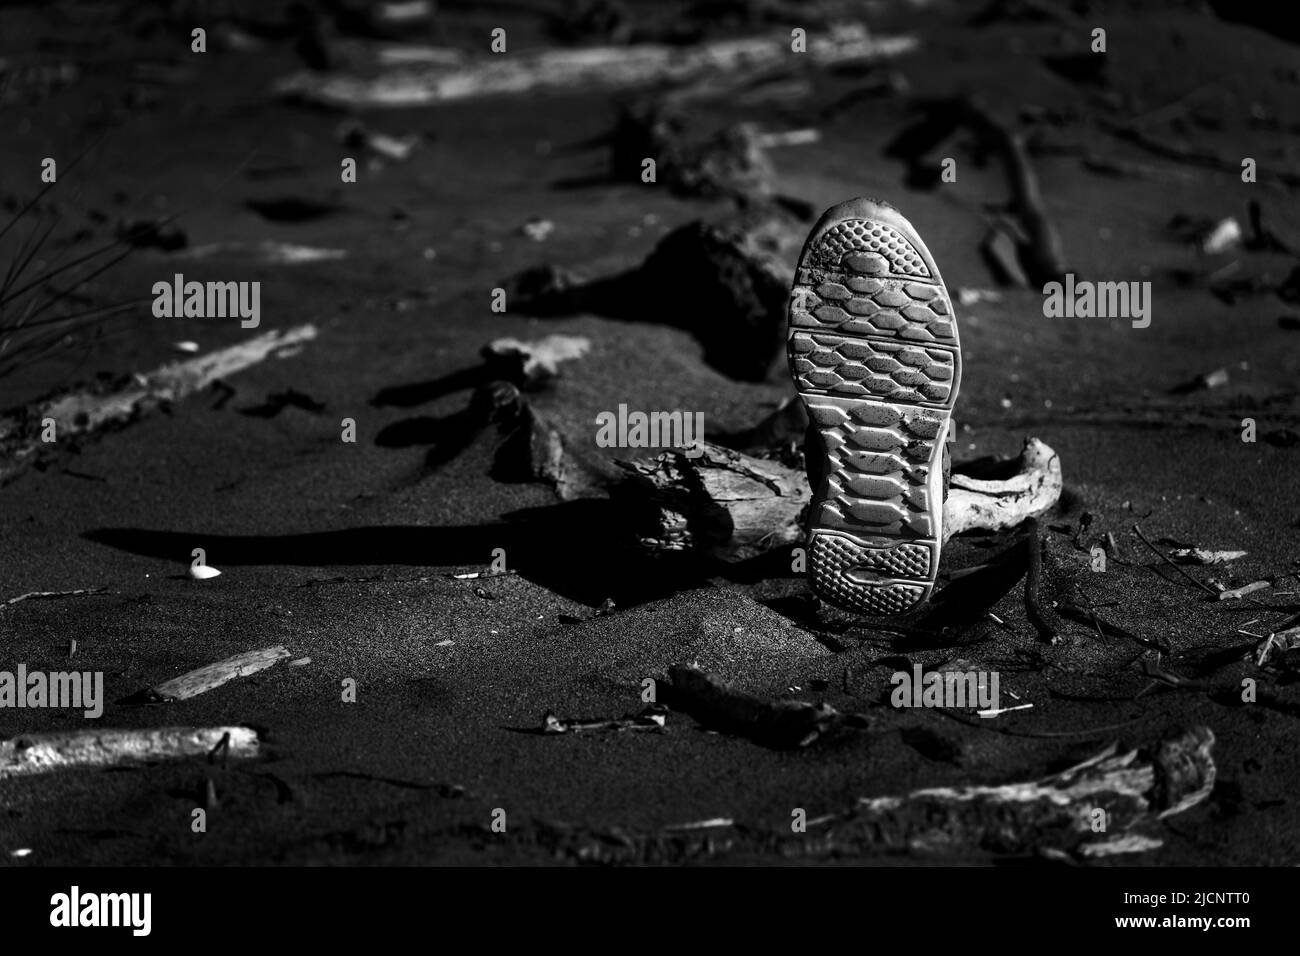 A mysterious left shoe with a white sole washed up on a beach, Aotearoa / New Zealand Stock Photo